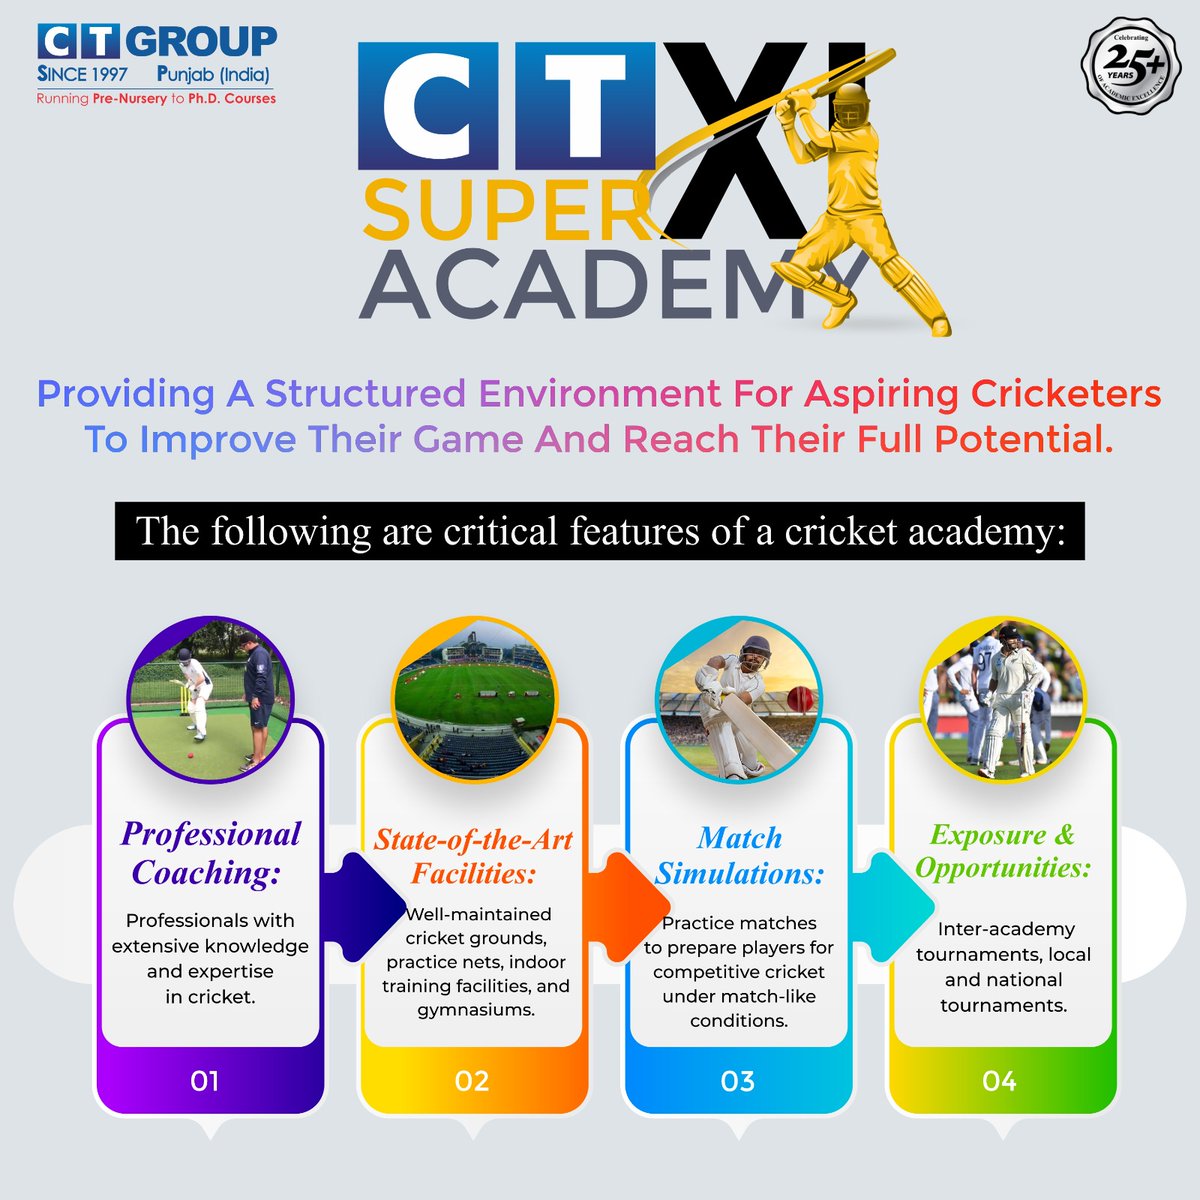 🏏 You're Invited to Join CT Super XI Academy! 🏏
Join us for an exciting journey of cricket excellence. 

#CTSuperXIacademy #cricket #cricketexcellence #cricketacademy #cricketjourney #cricketpassion #crickettraining #sportsacademy #joinus #cricketlife #cricketlove